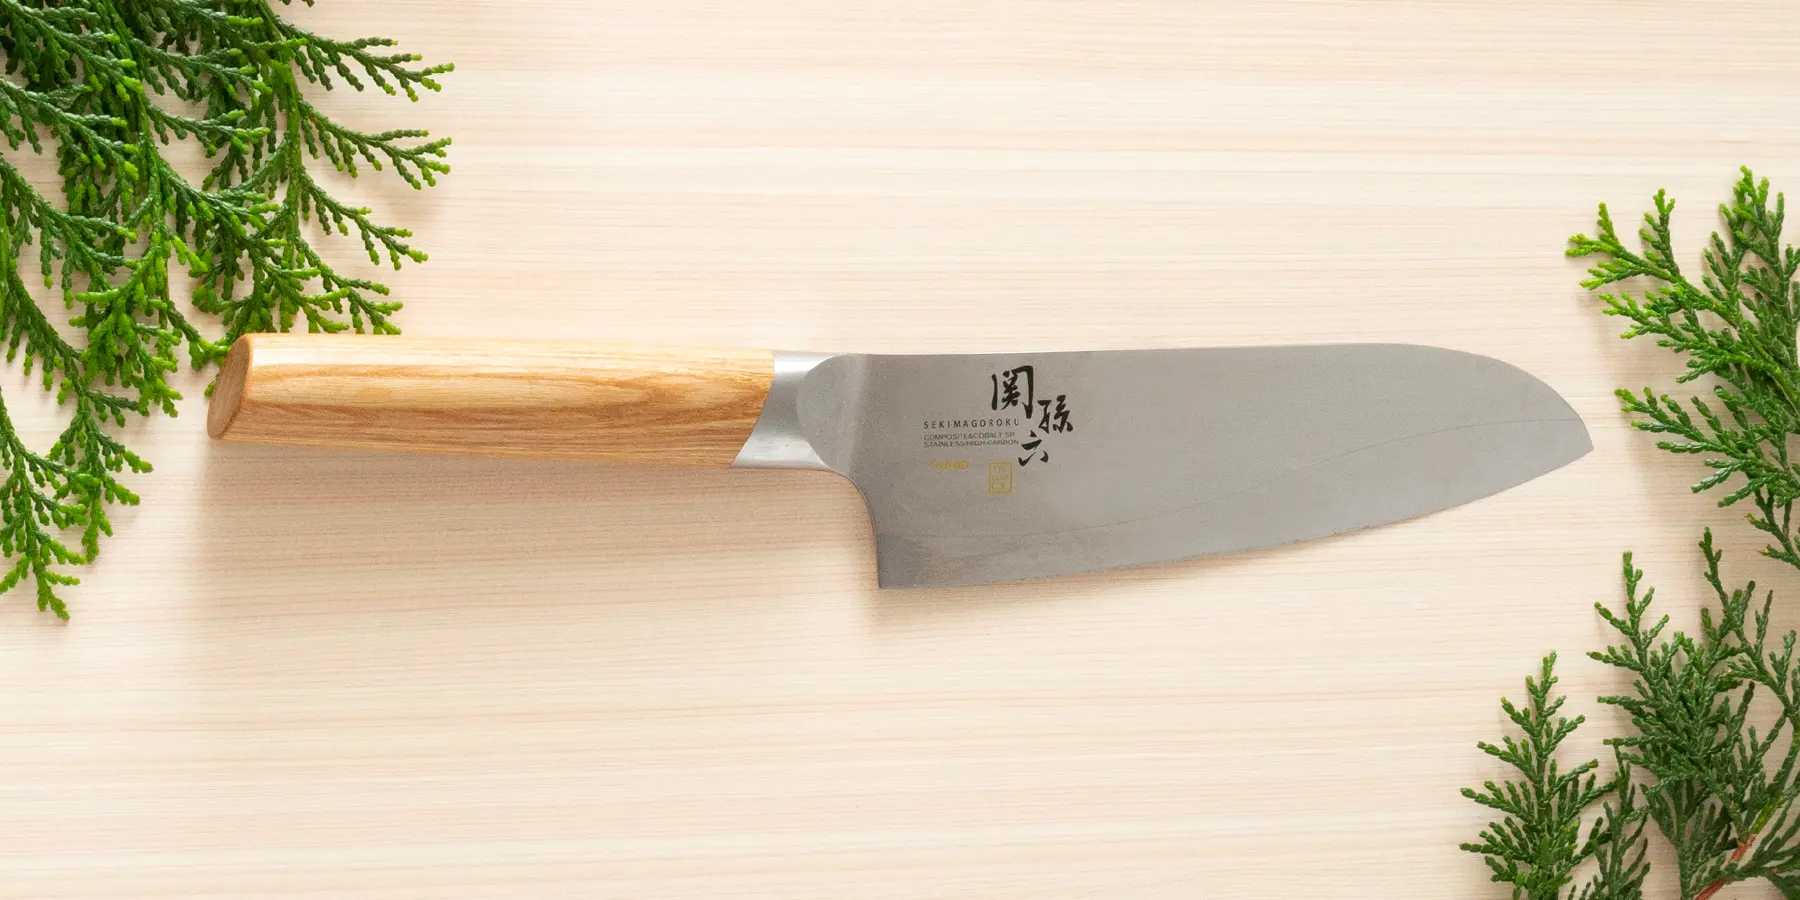 Discover products by Seki Magoroku on Globalkitchen Japan.